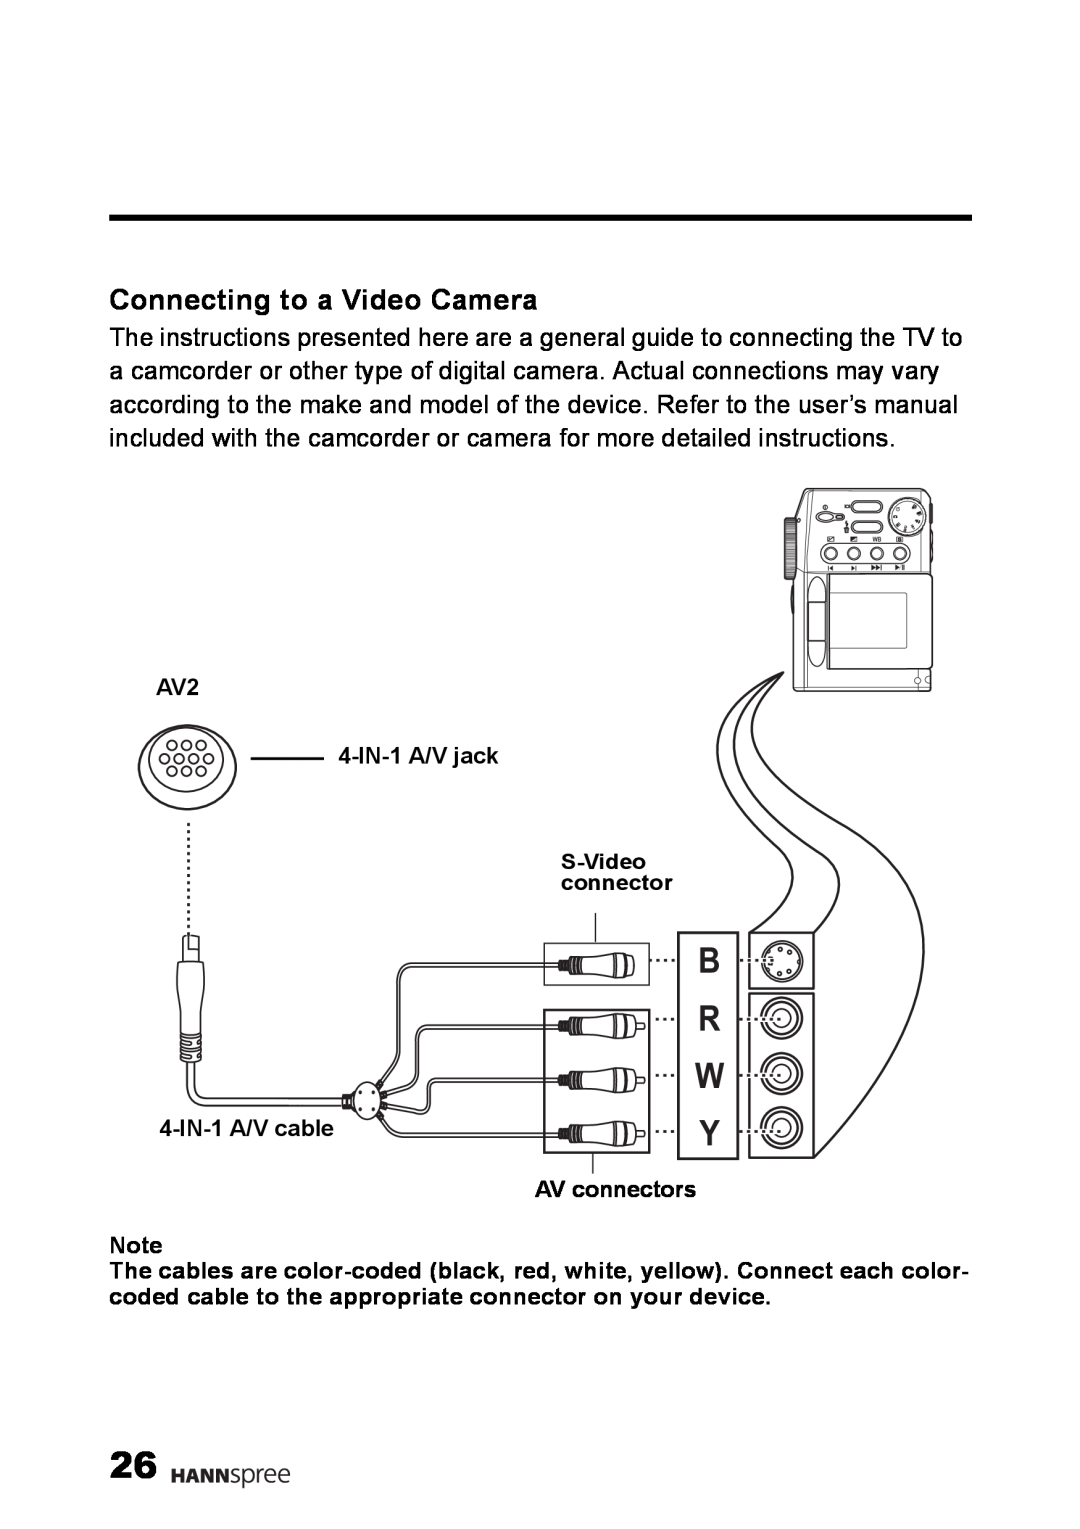 HANNspree LT09-10U1-000 user manual Connecting to a Video Camera 